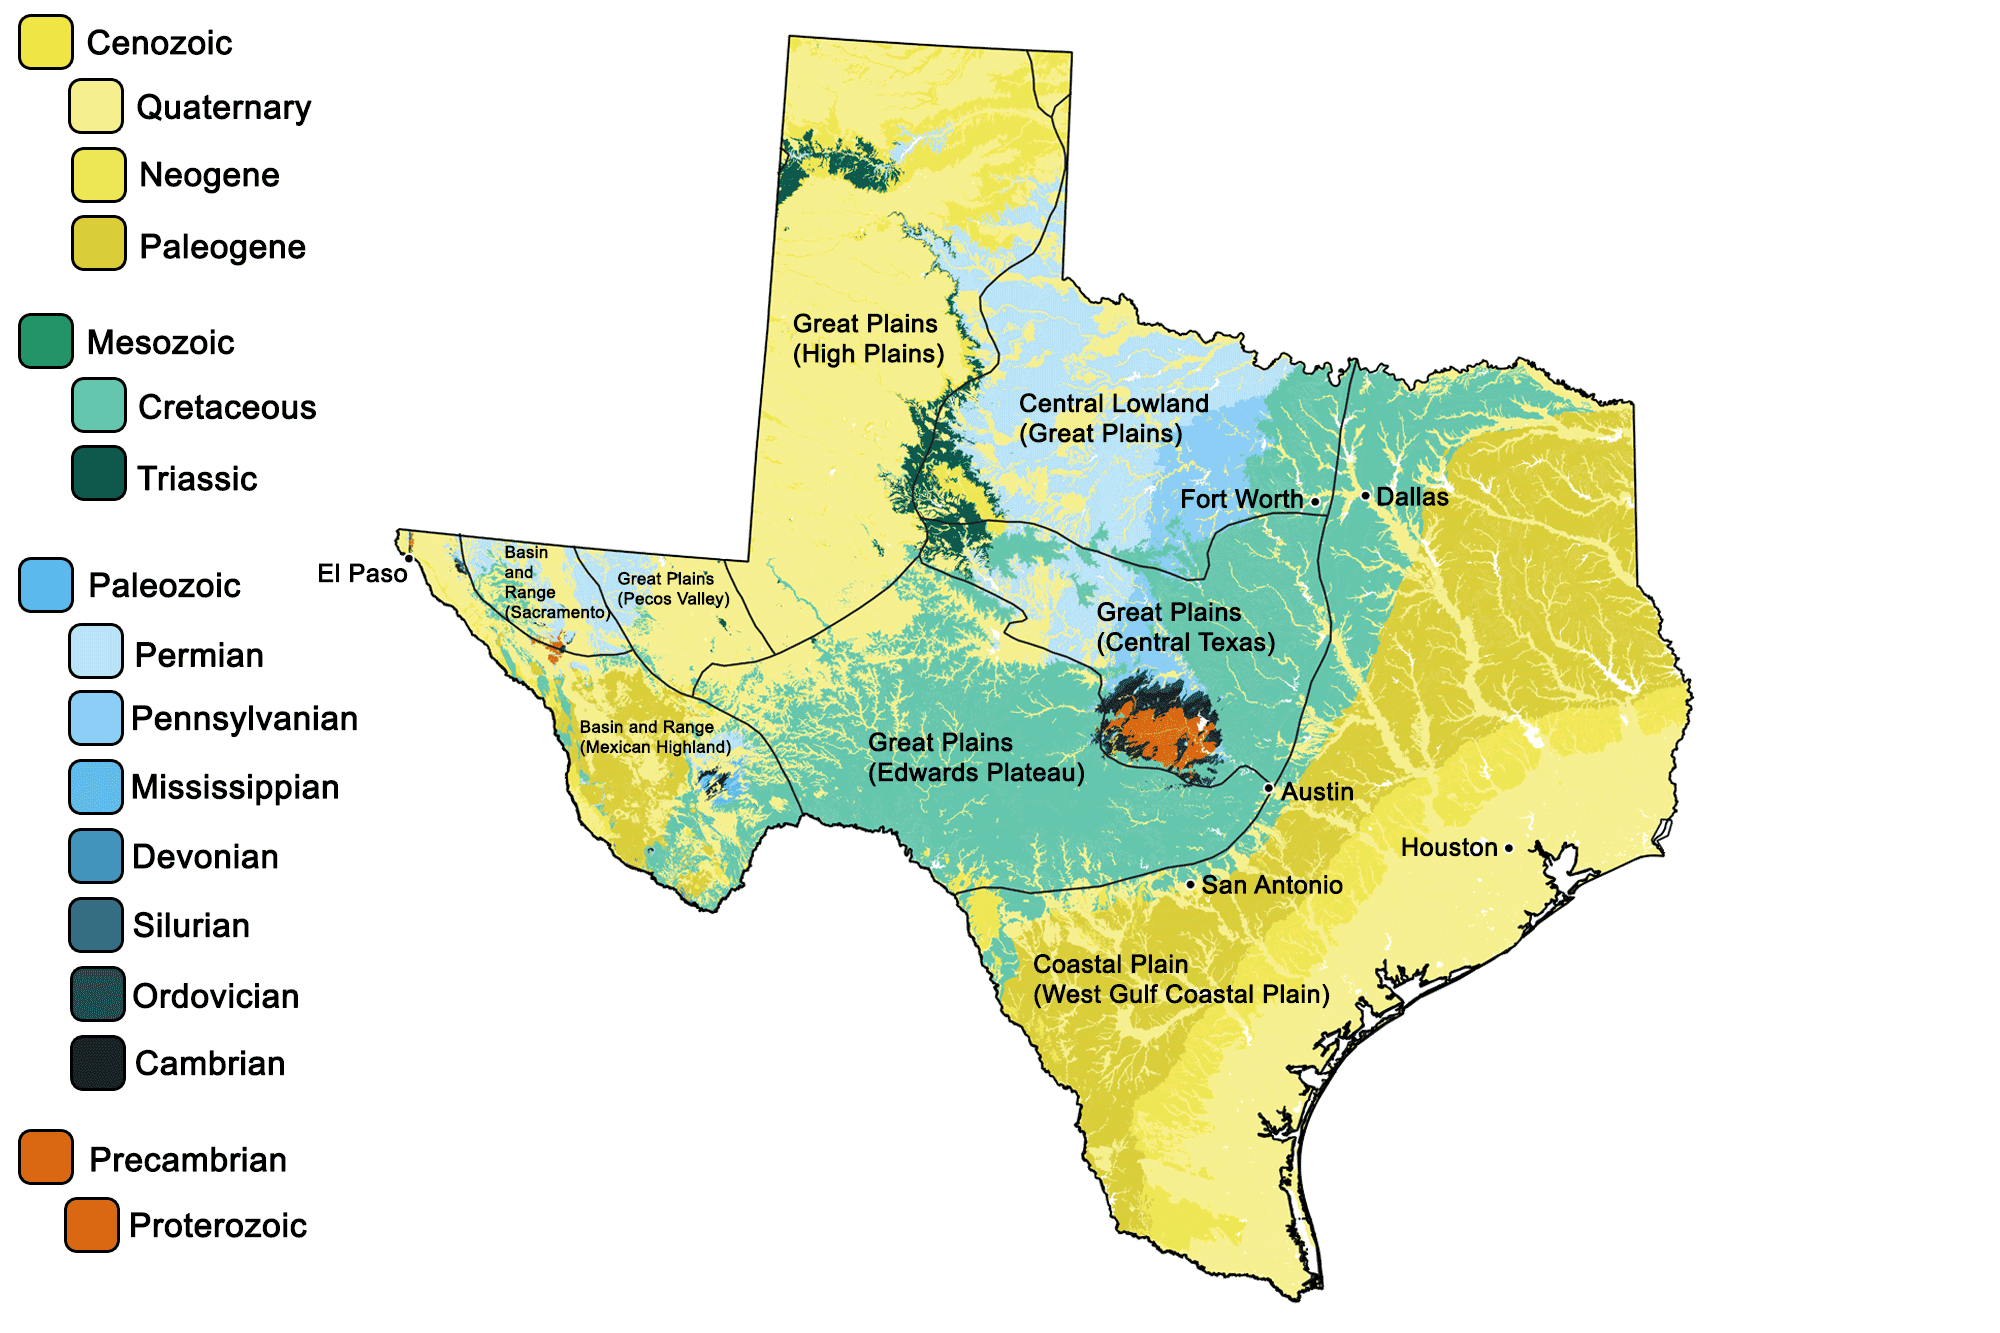 Geologic map of Texas with physiographic regions identified.